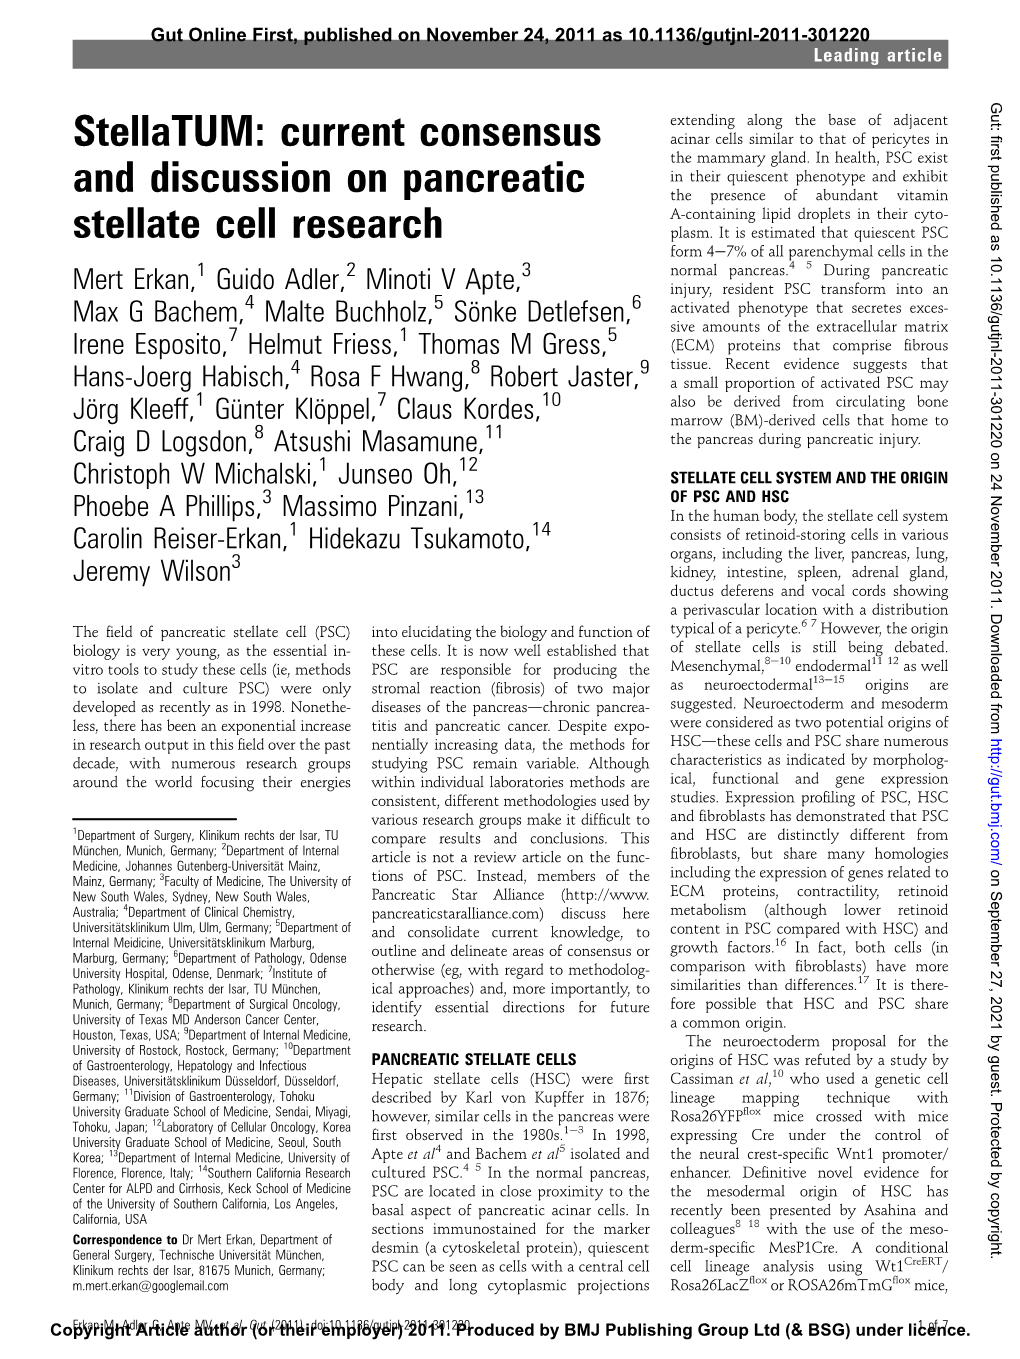 Current Consensus and Discussion on Pancreatic Stellate Cell Research